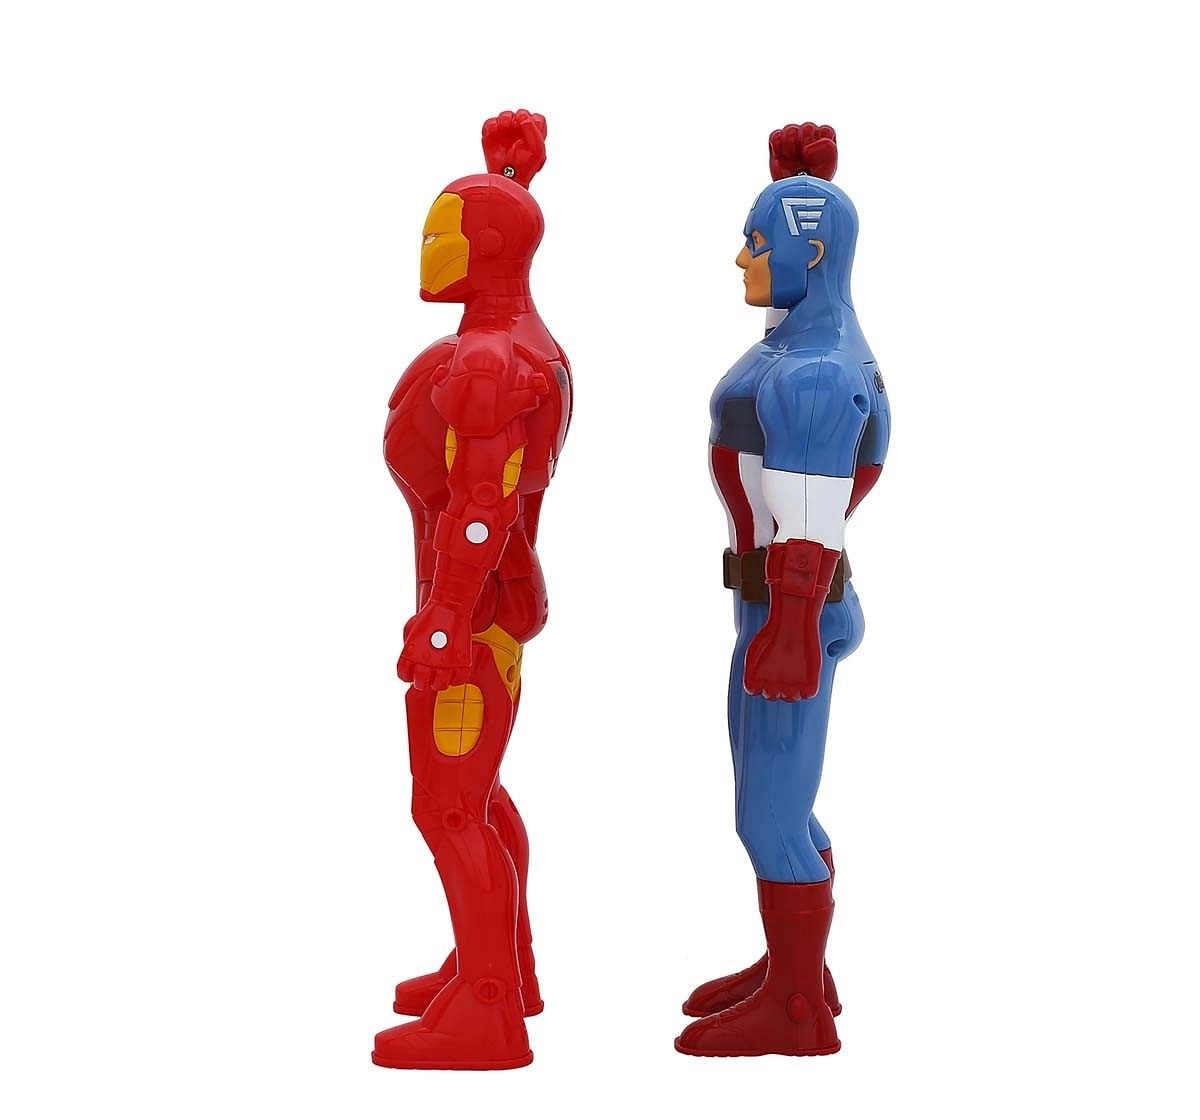 IMC Walkie Talkie Toy Iron Man & Captain America Action Figure Play Sets for Kids age 3Y+ 